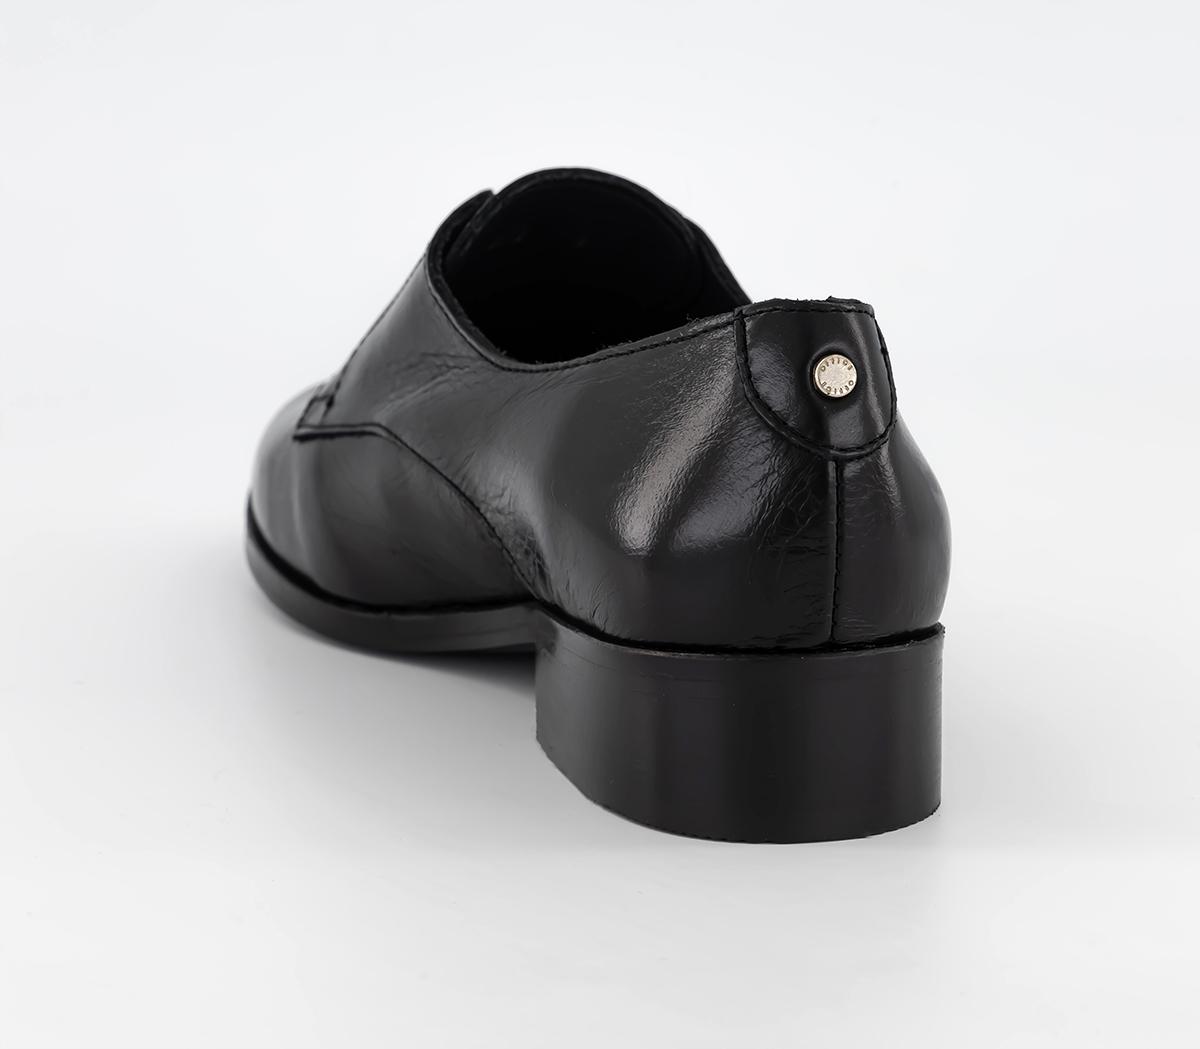 OFFICE Farrell Slip On Flats Black Leather - Flat Shoes for Women